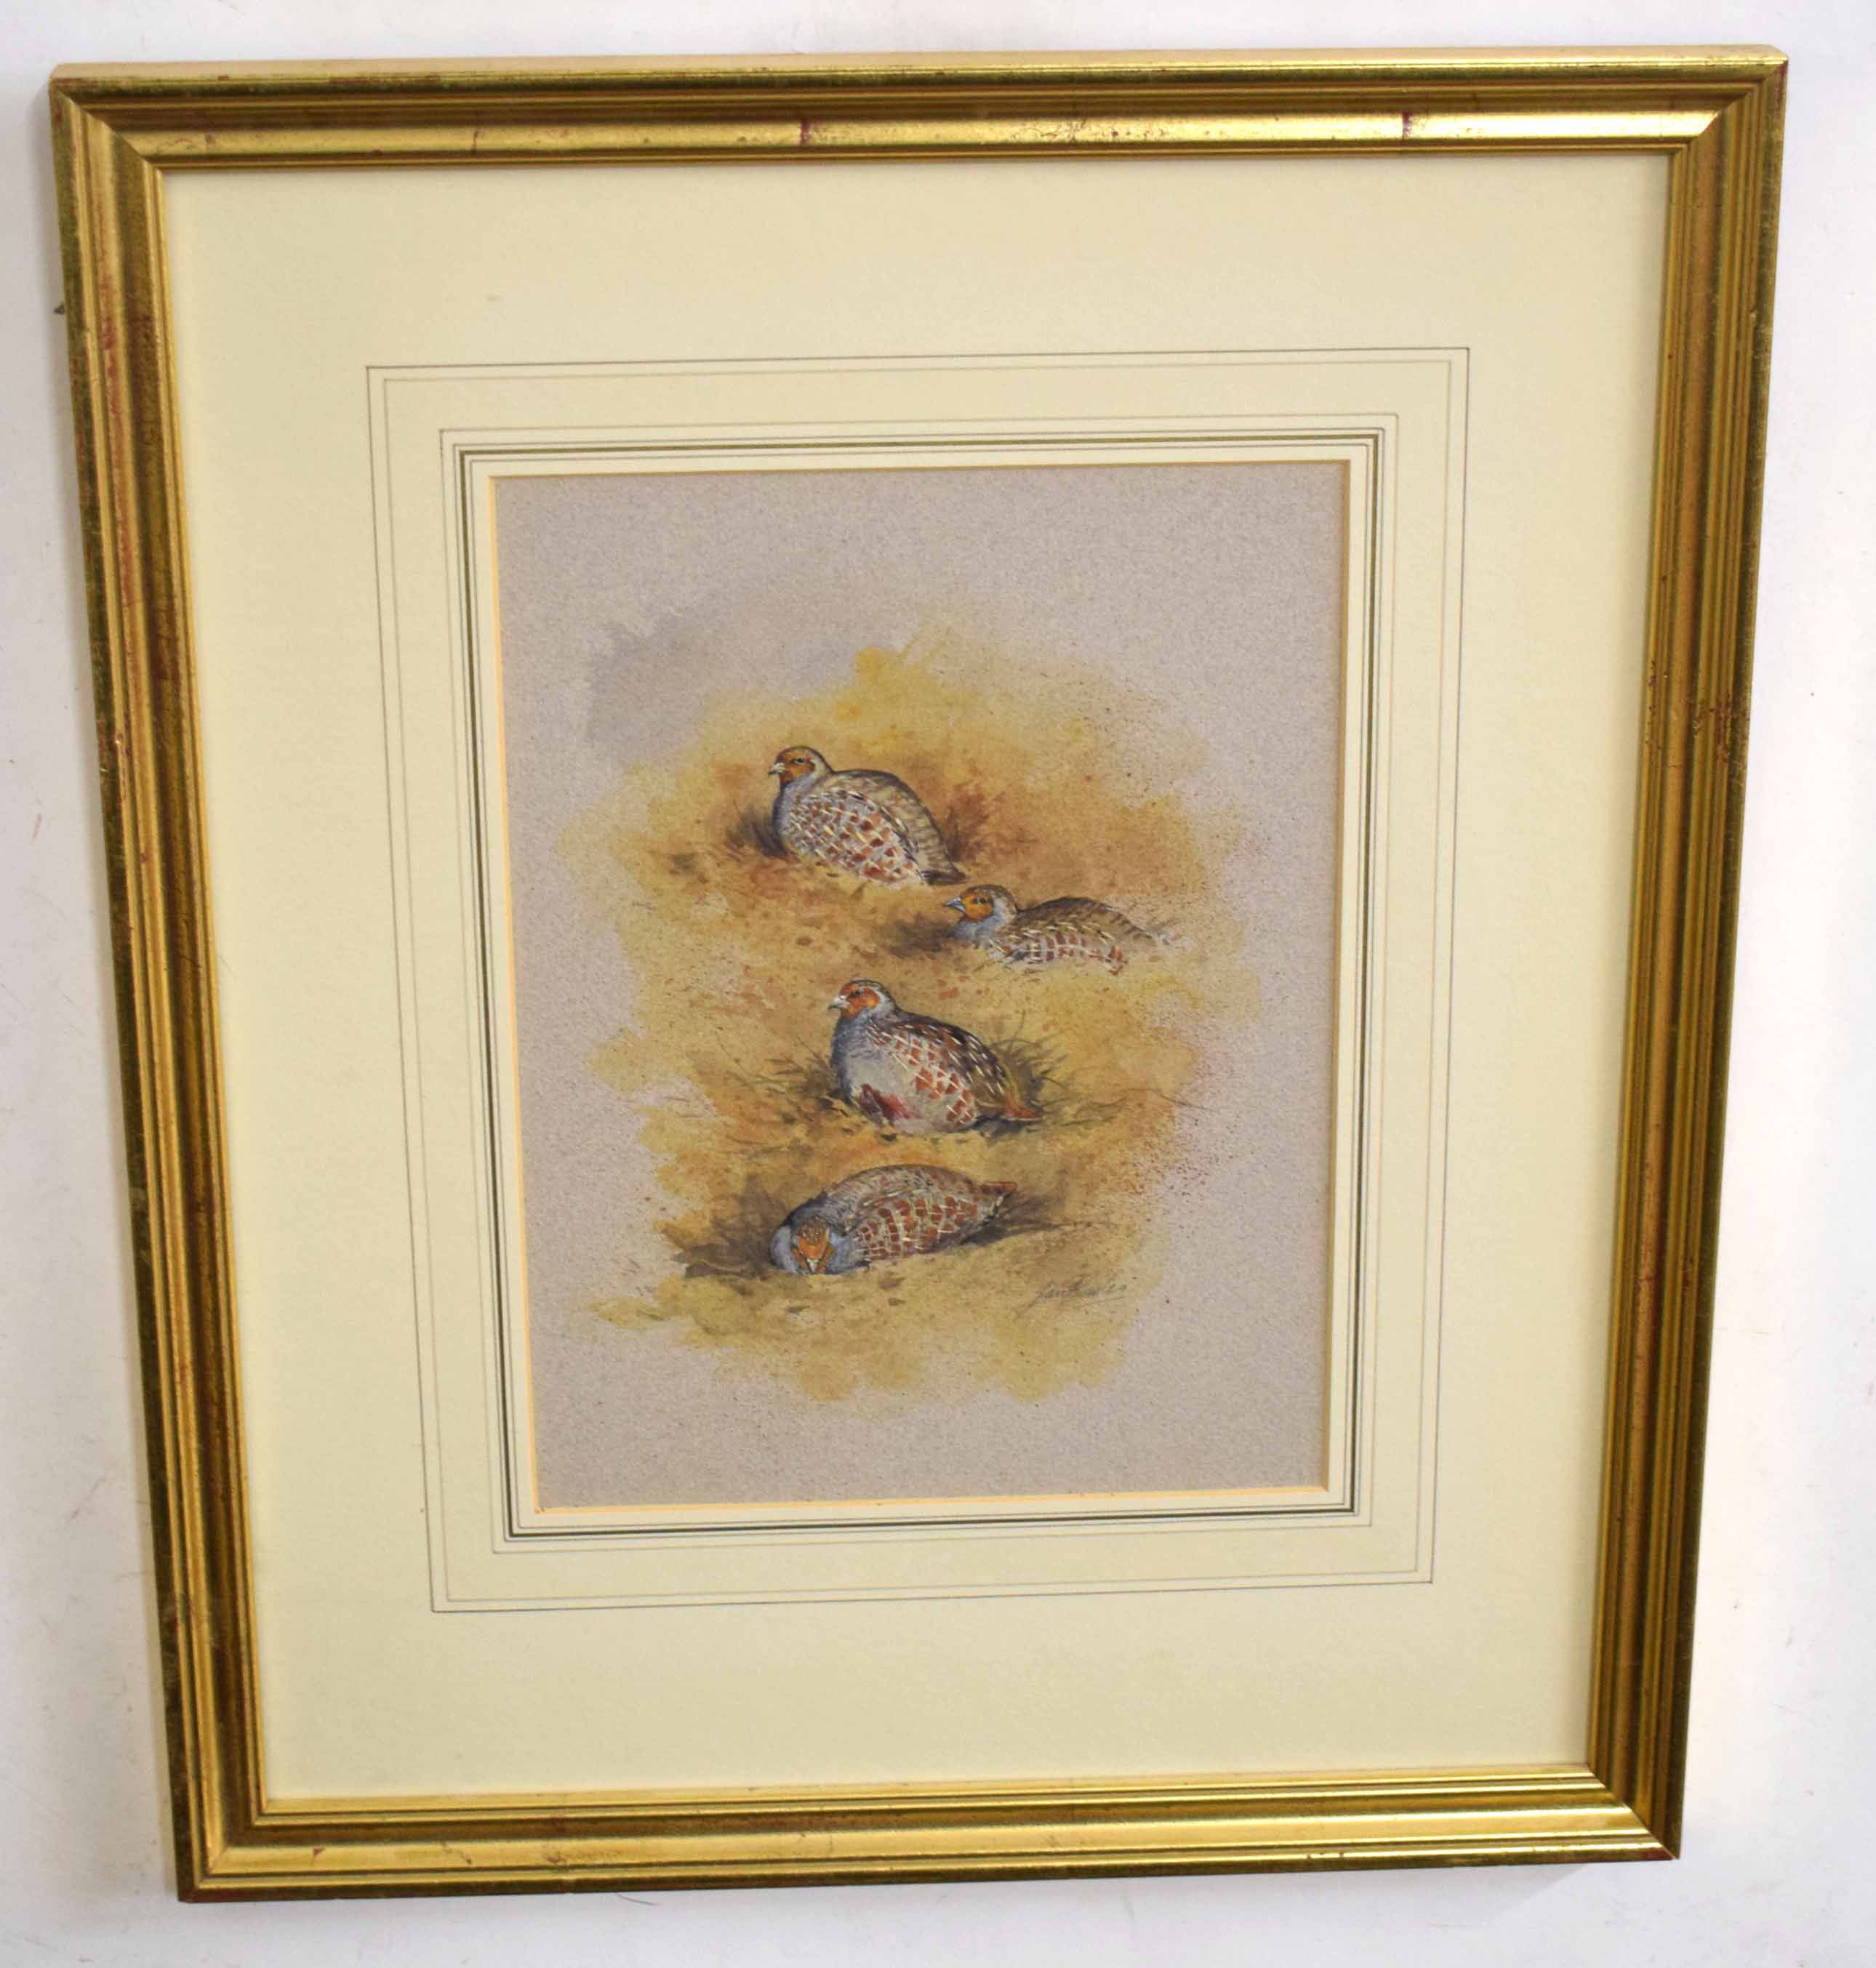 Ian Bowles (born 1947), "Pheasant", "Grouse", "Partridge" and "Snipe", set of four watercolours, all - Image 2 of 4